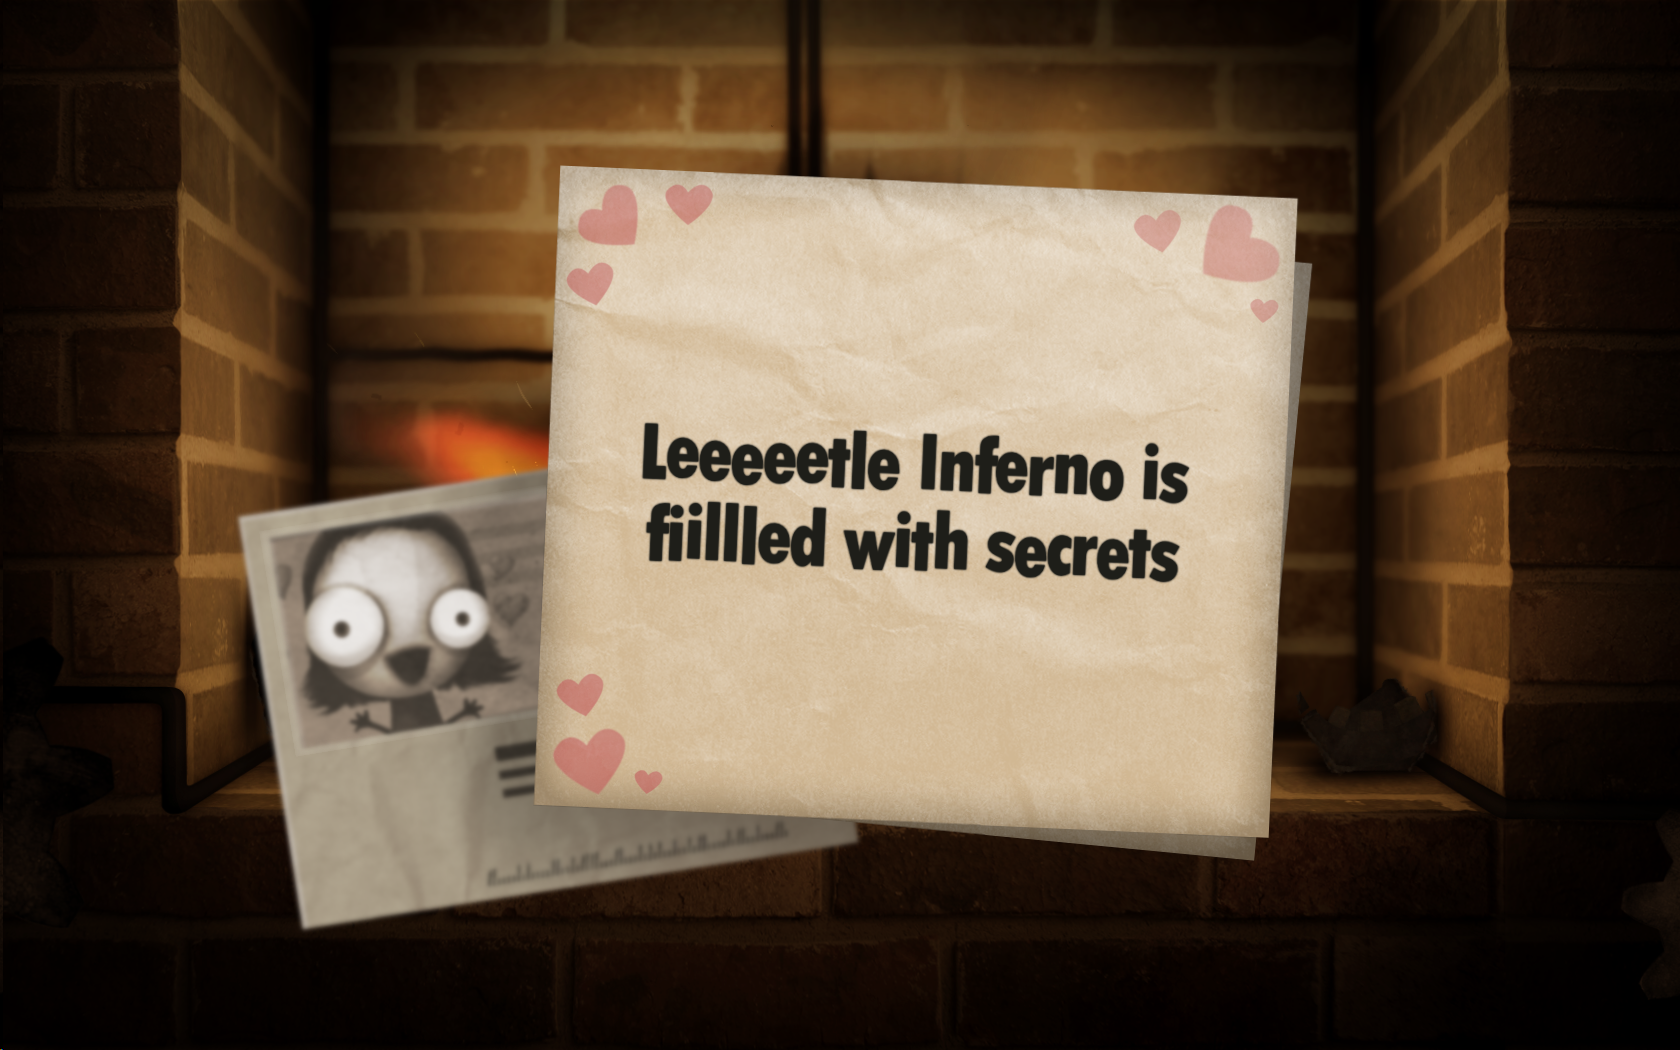 Little Inferno is filled with secrets